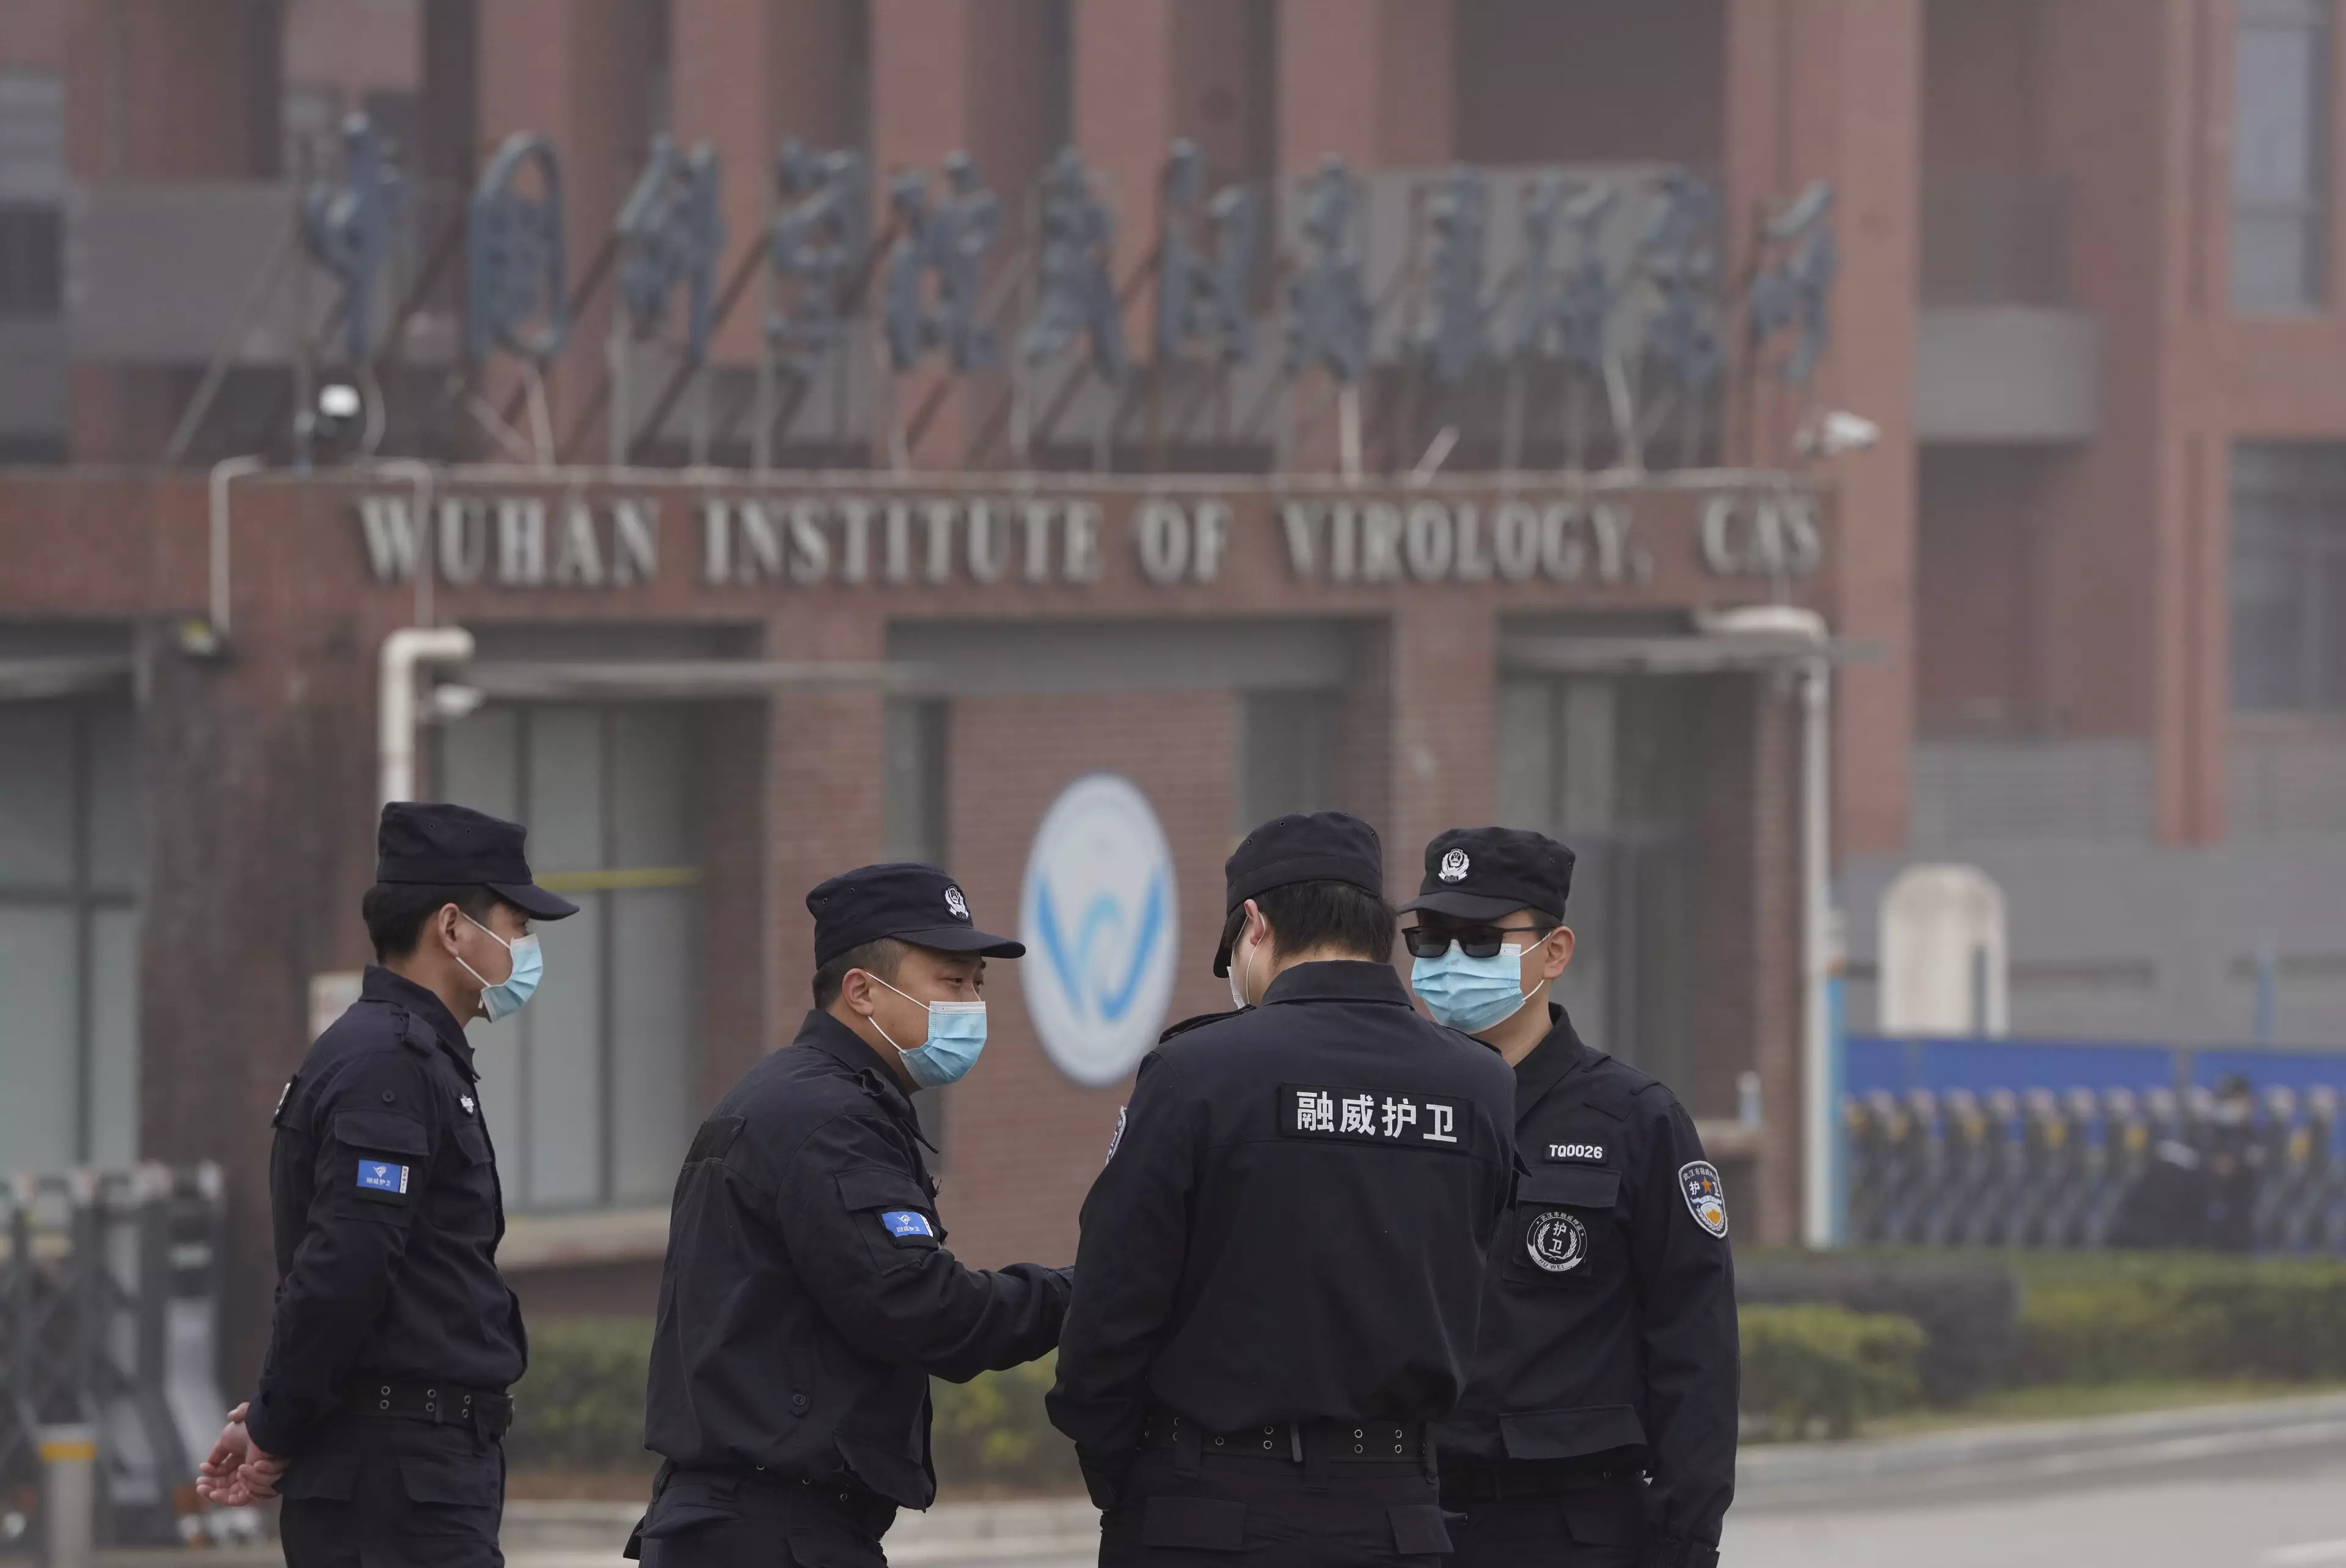 Security personnel gather near the entrance of the Wuhan Institute of Virology.